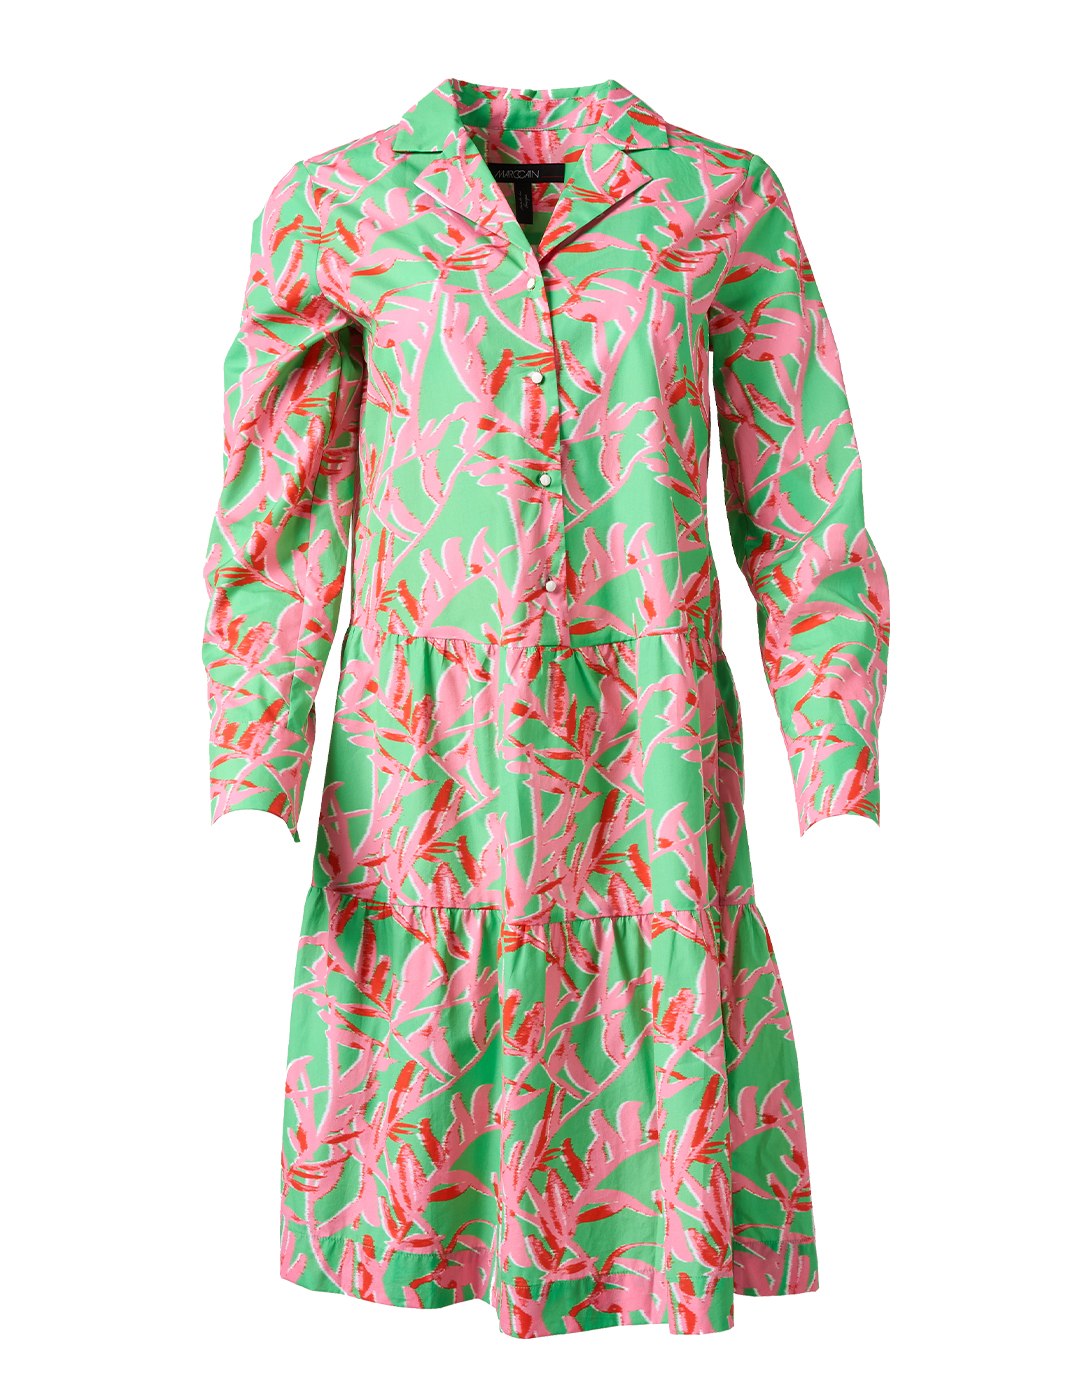 Productiviteit Smederij pad Pink and Green Print Cotton Dress | Marc Cain